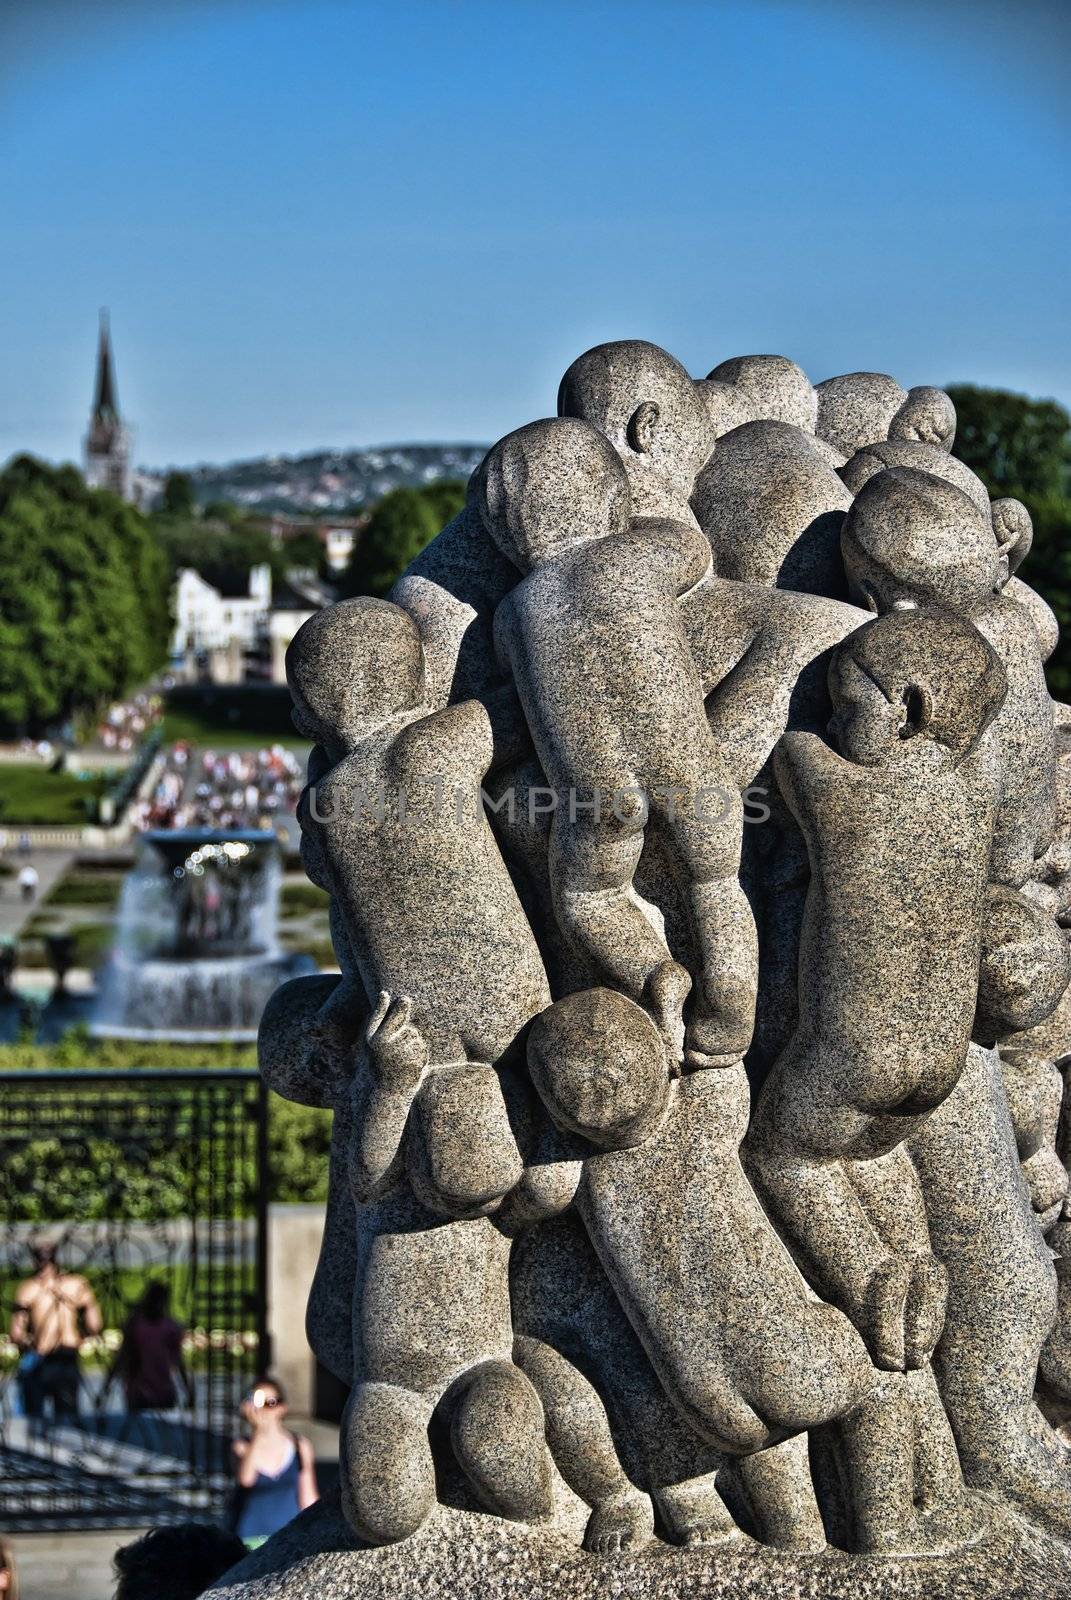 Statue in a Park of Oslo, Norway, May 2009